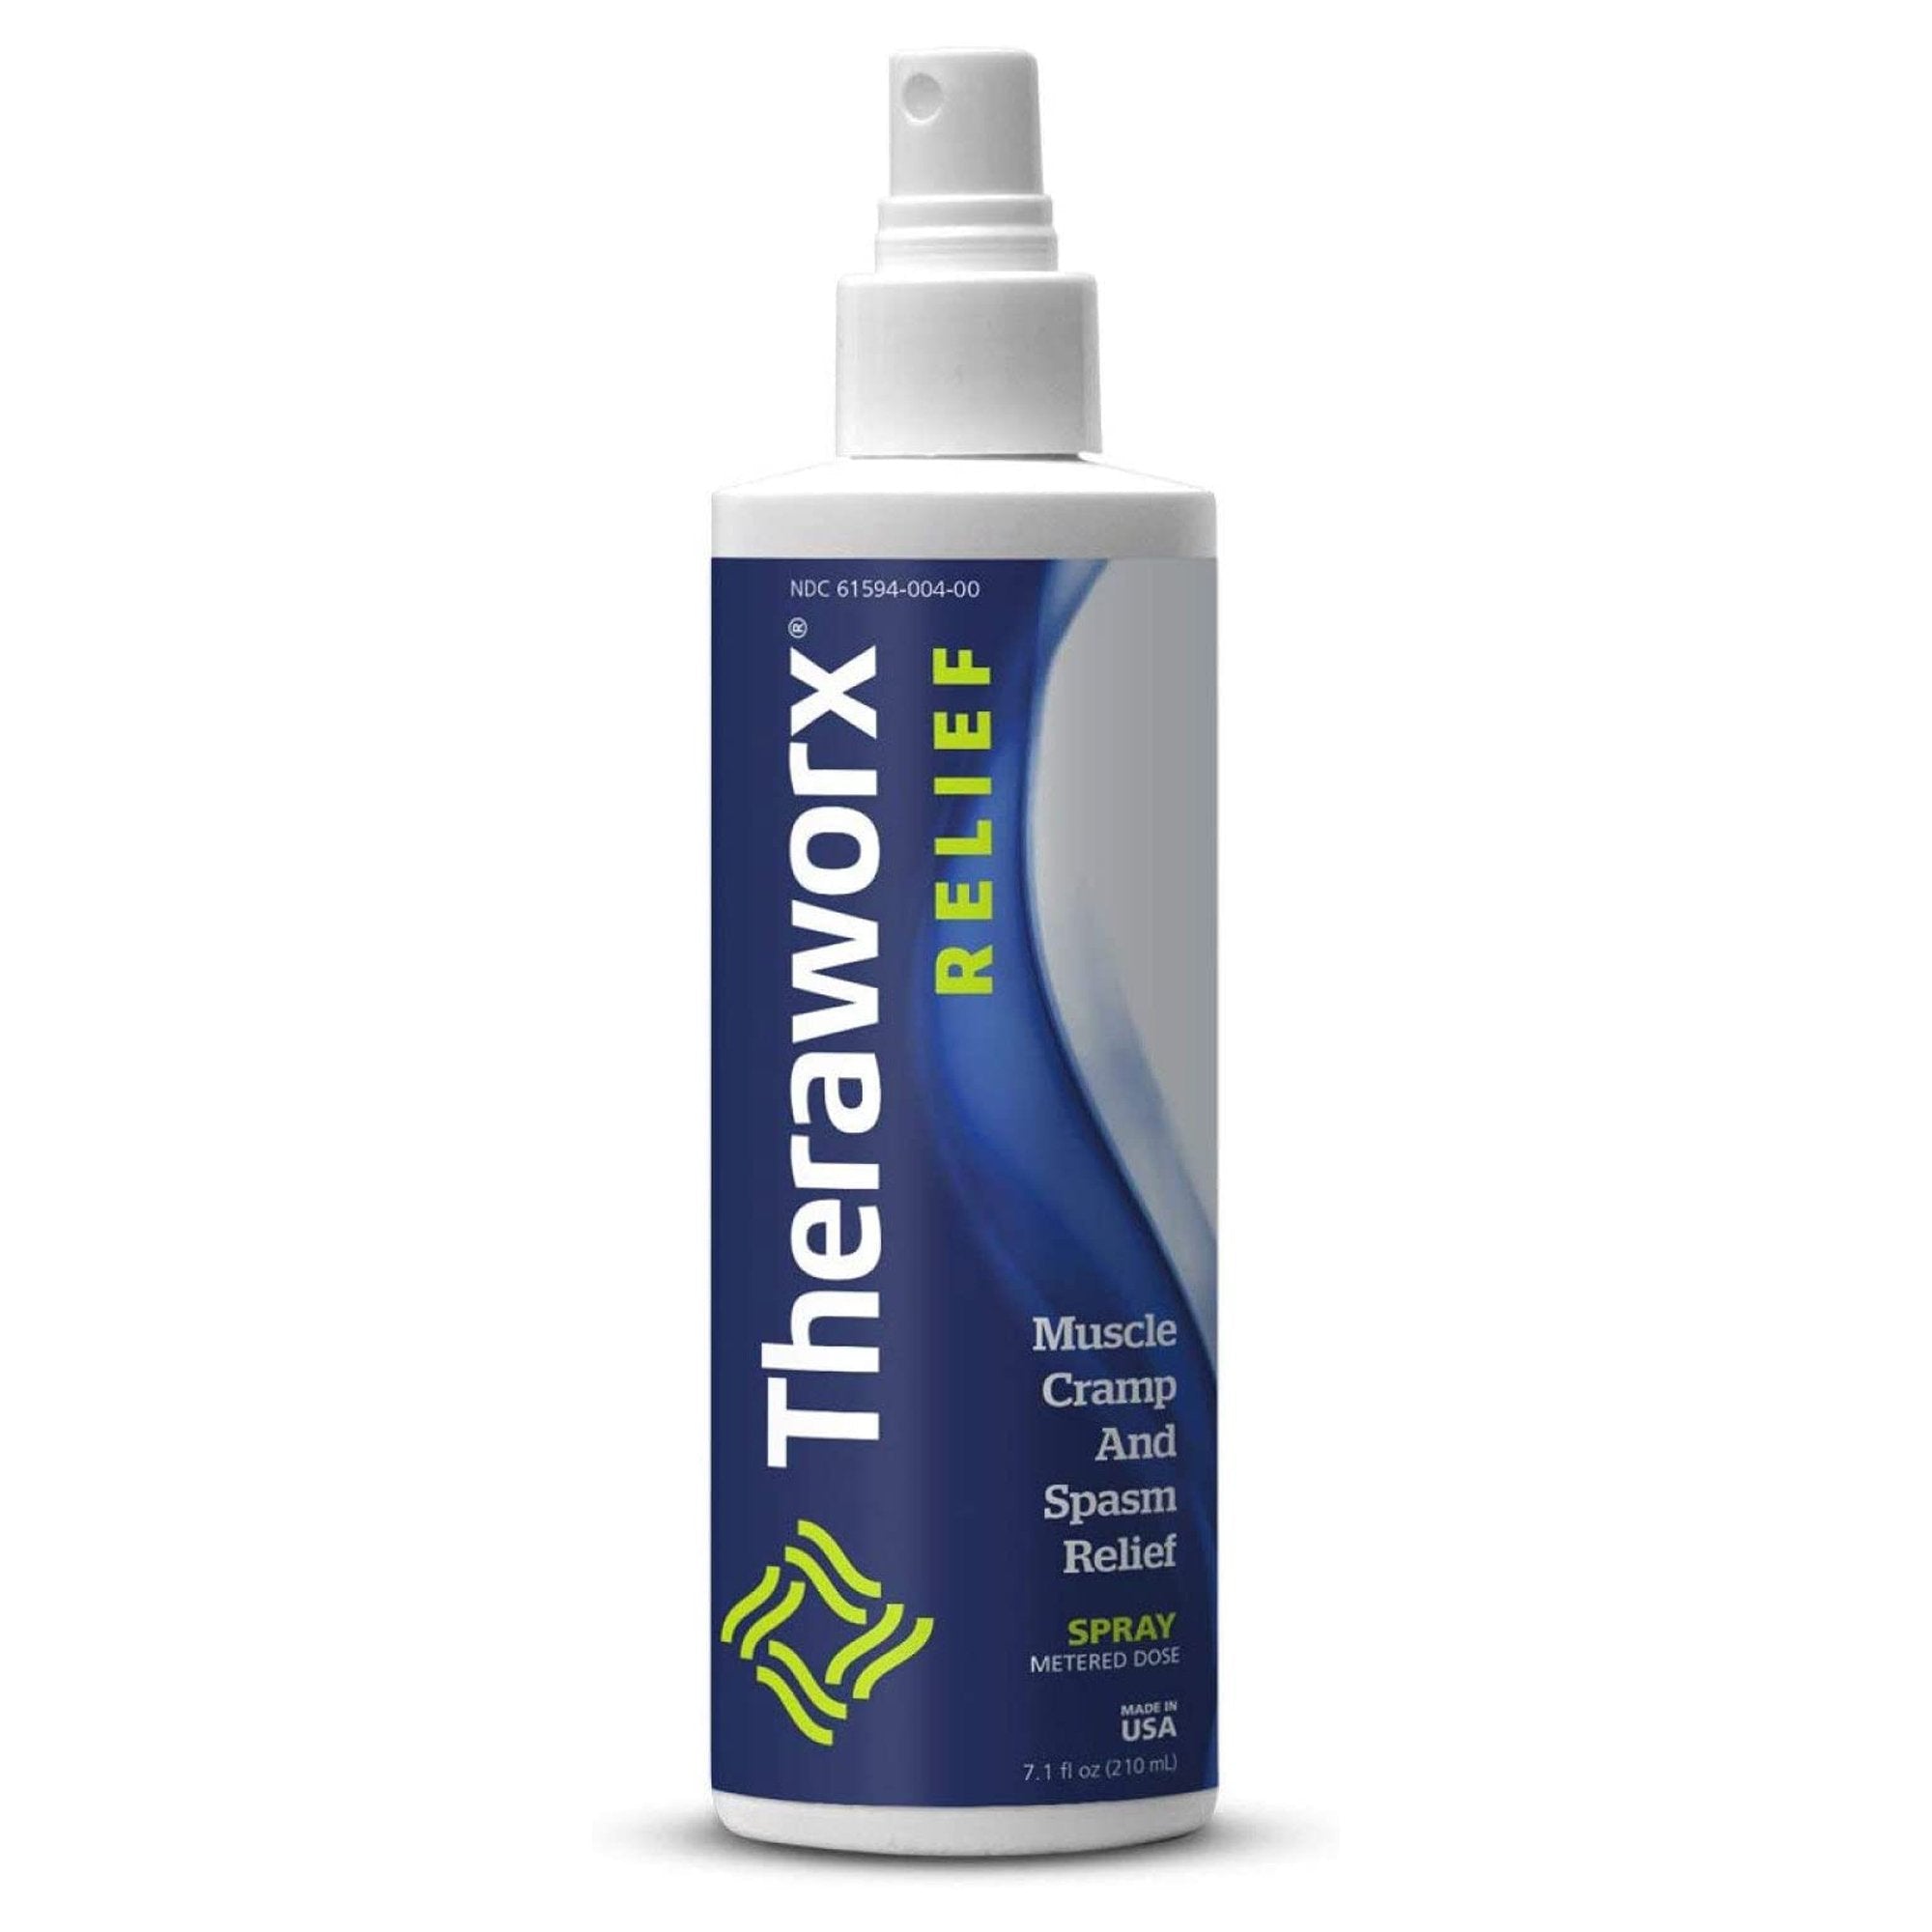 Topical Pain Relief Theraworx® Relief 0.5% Strength Magnesium Sulfate 6X HPUS Foam 7.1 oz.